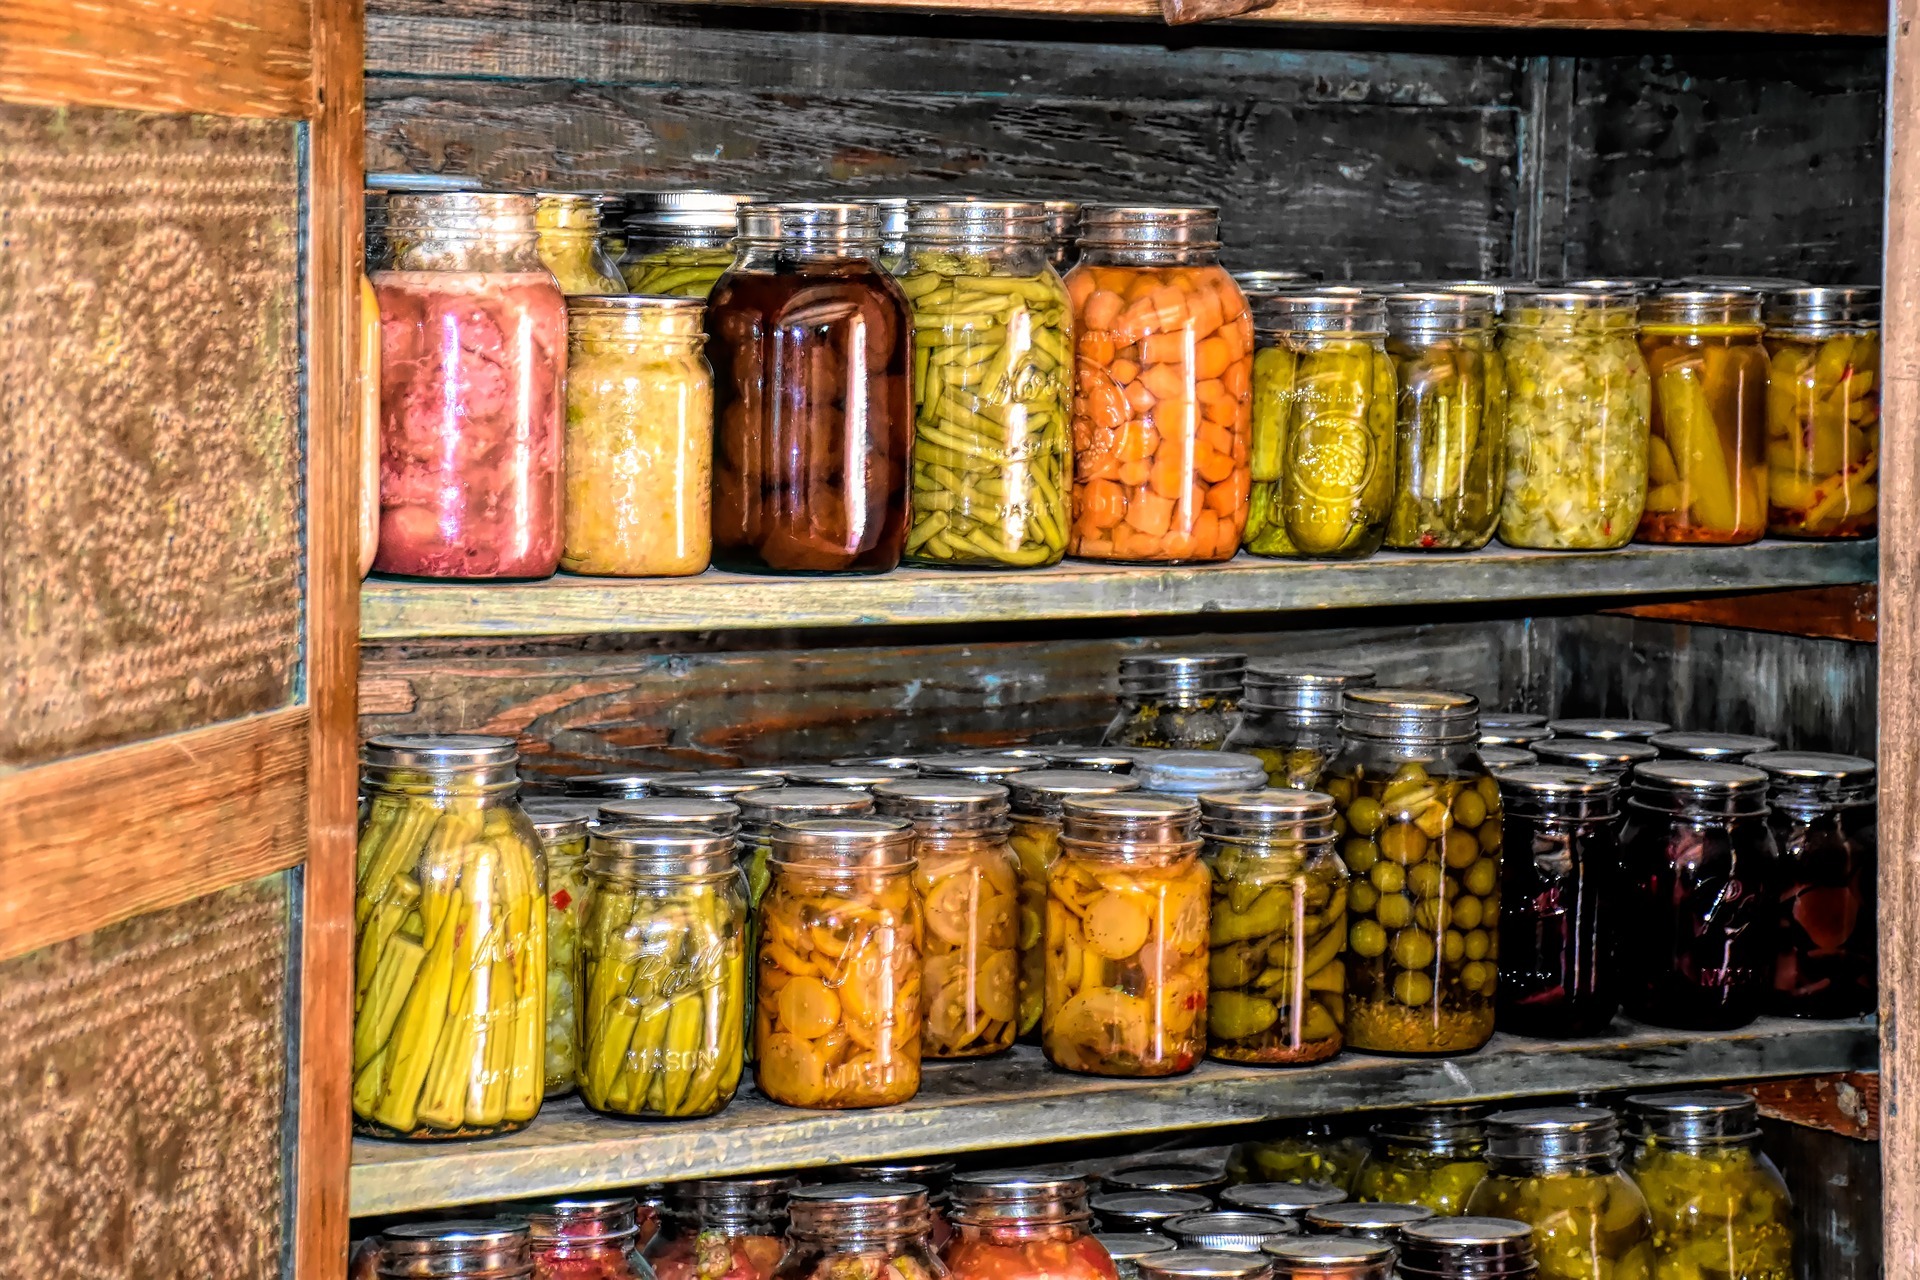 Canned goods in a jar